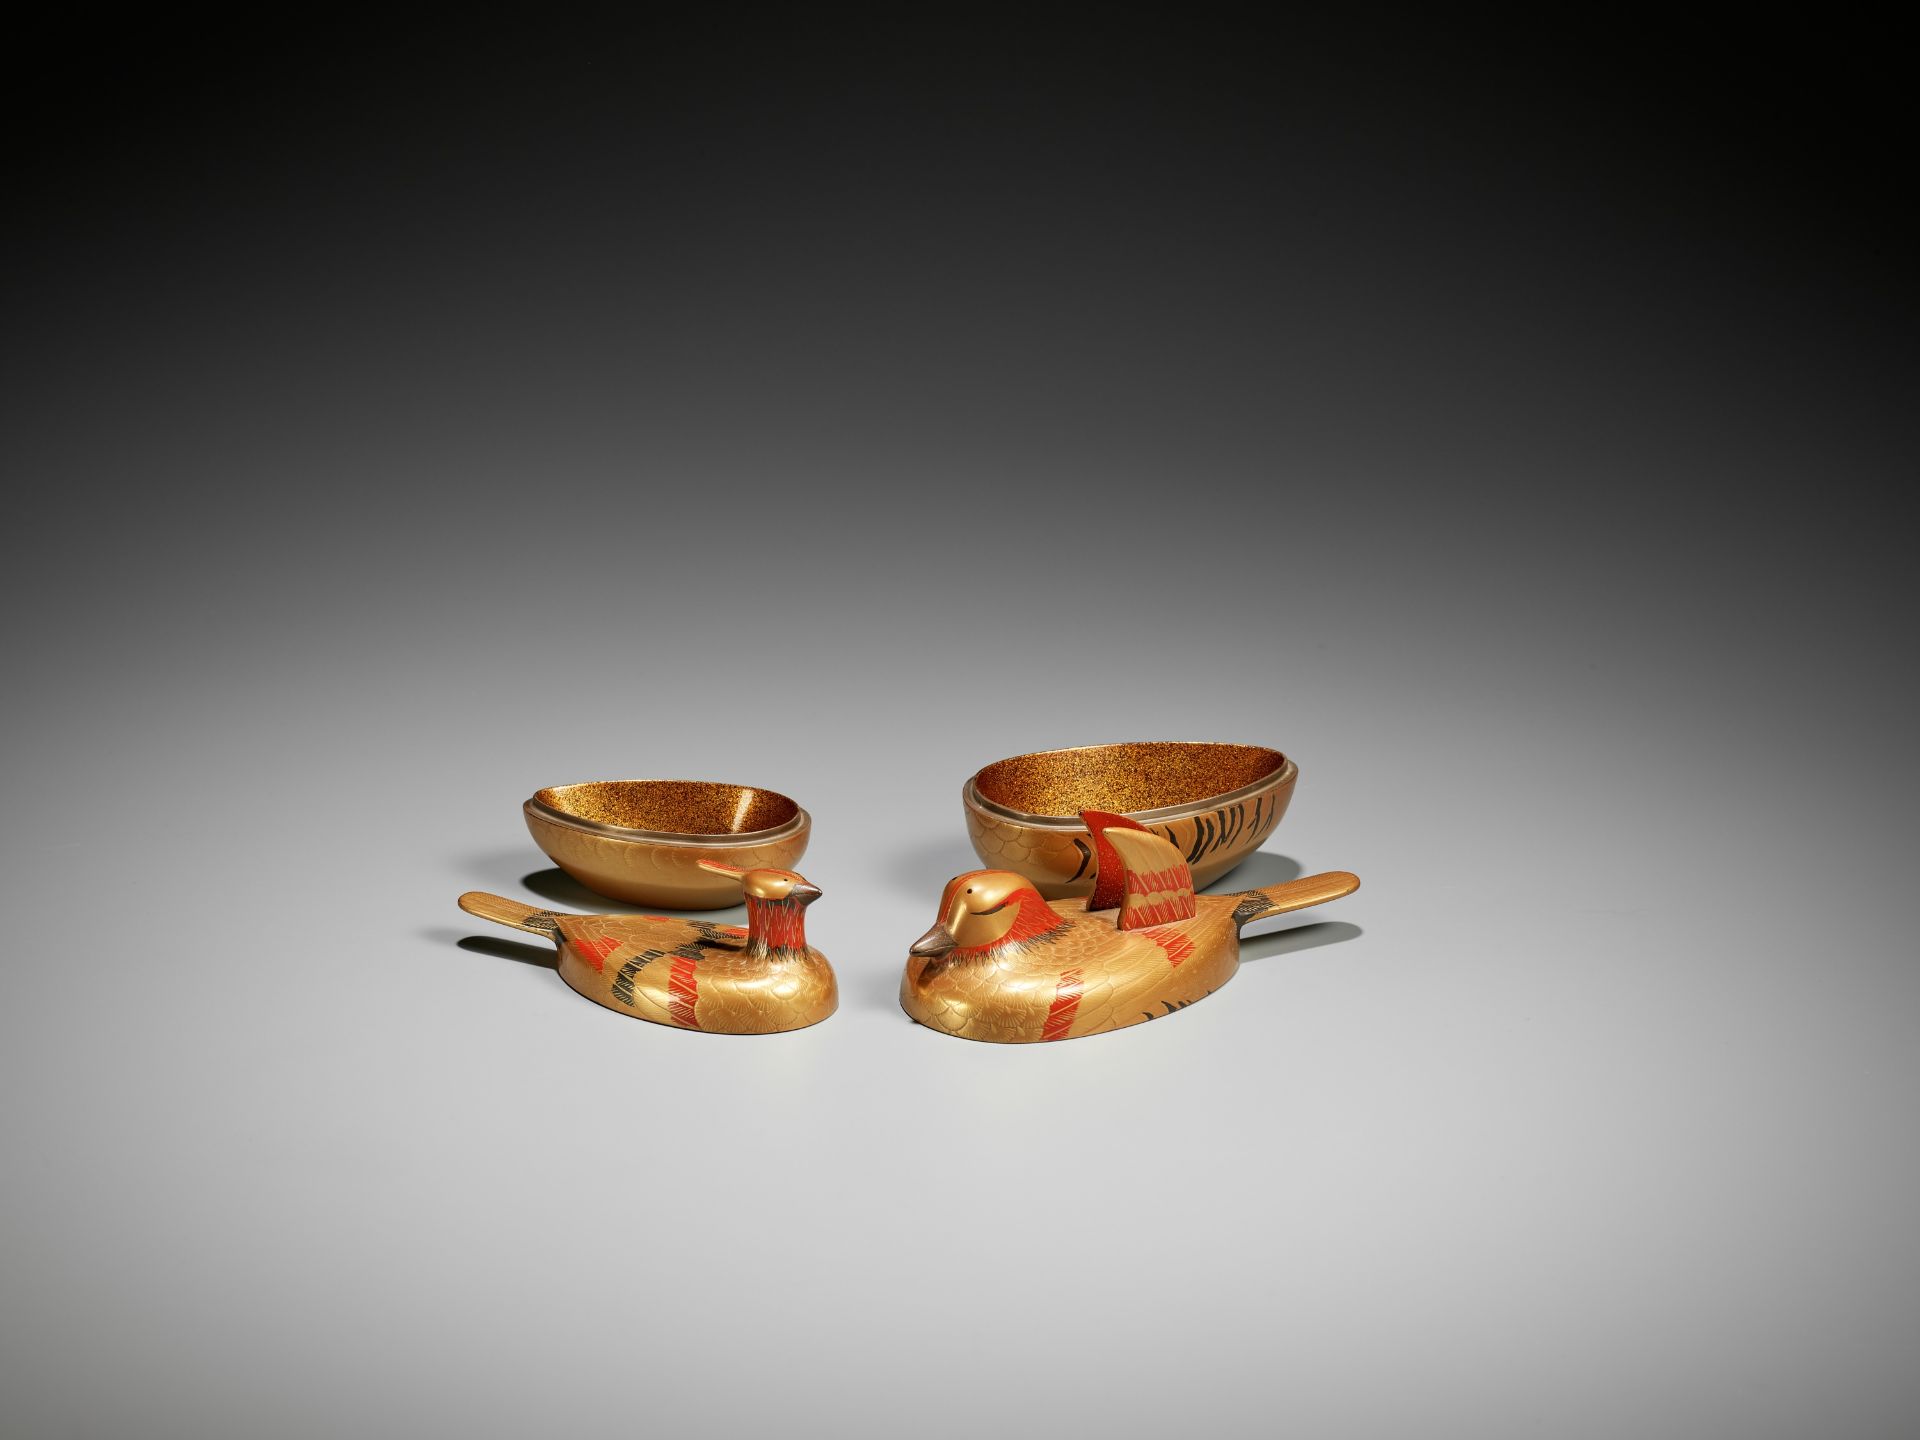 A PAIR OF GOLD LACQUER DUCK-FORM KOGO (INCENSE BOXES) AND COVERS - Image 7 of 9